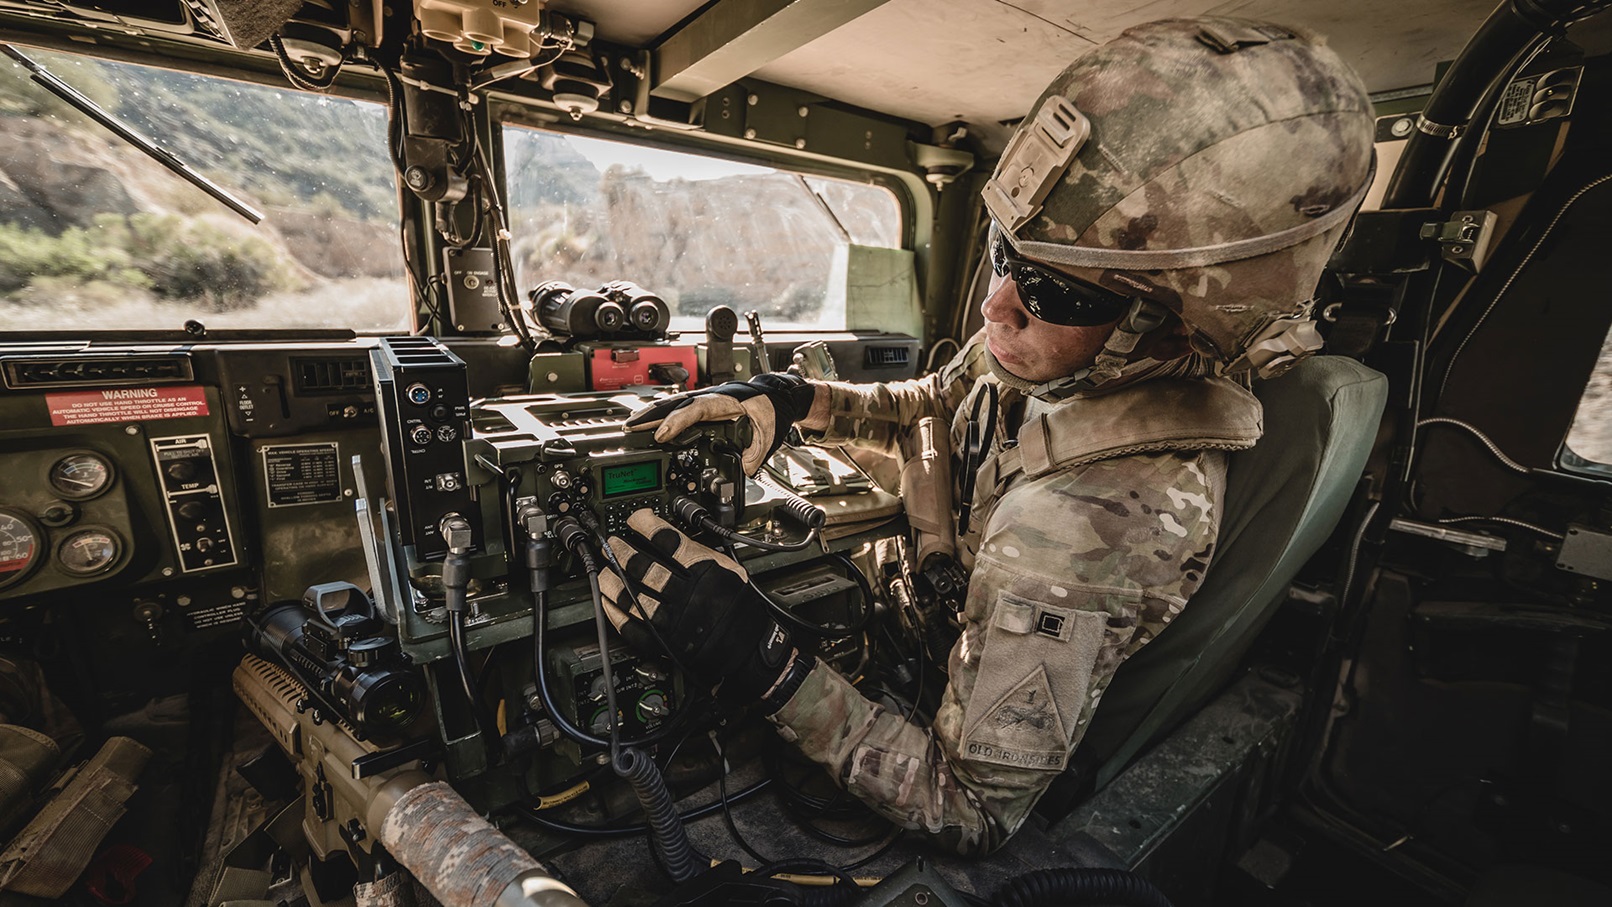 An optional vehicle mounting kit for Collins Aerospace's PRC-162 ground radio supports field retrofits in less than a day, providing lower life cycle costs and flexibility in deployment.